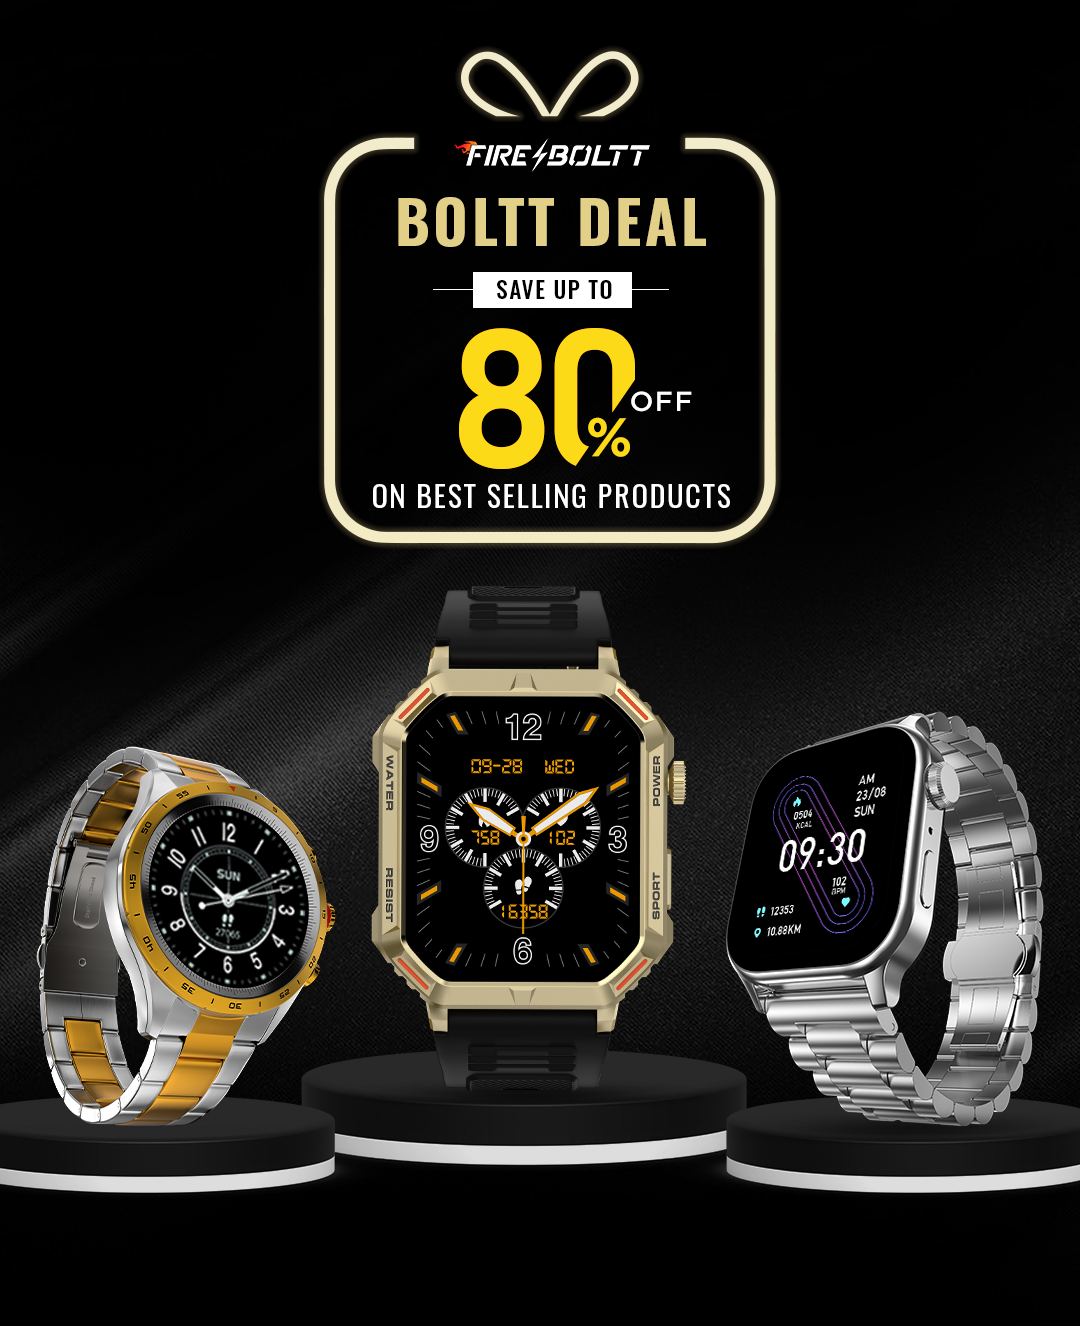 Up to 80% off on top selling